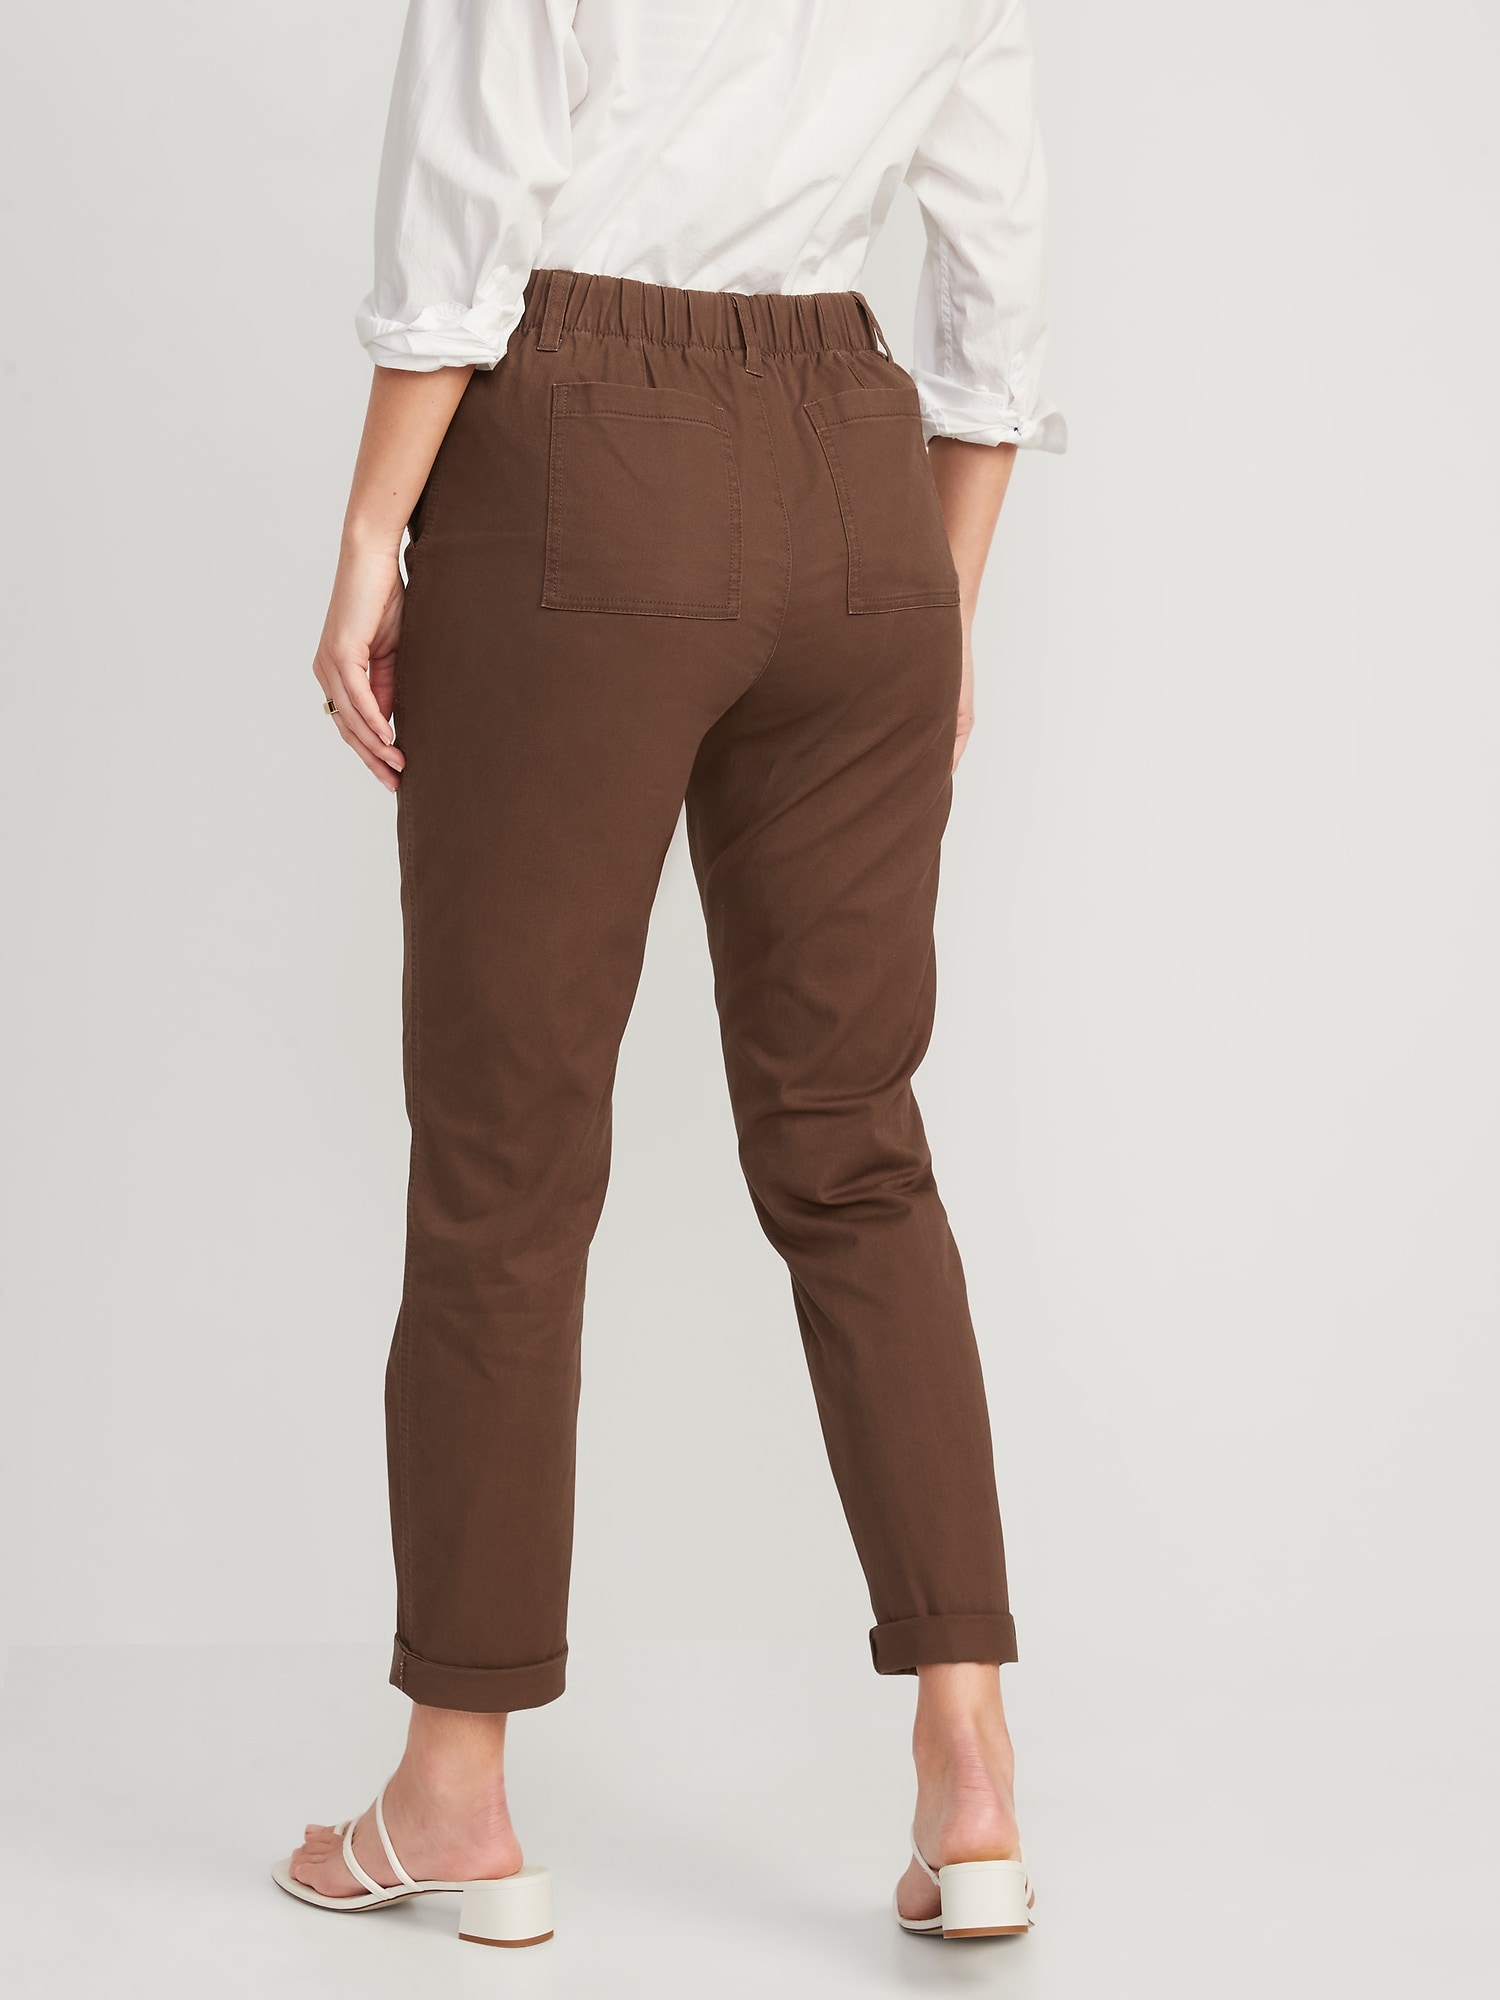 High-Waisted OGC Chino Cropped Workwear Pants for Women